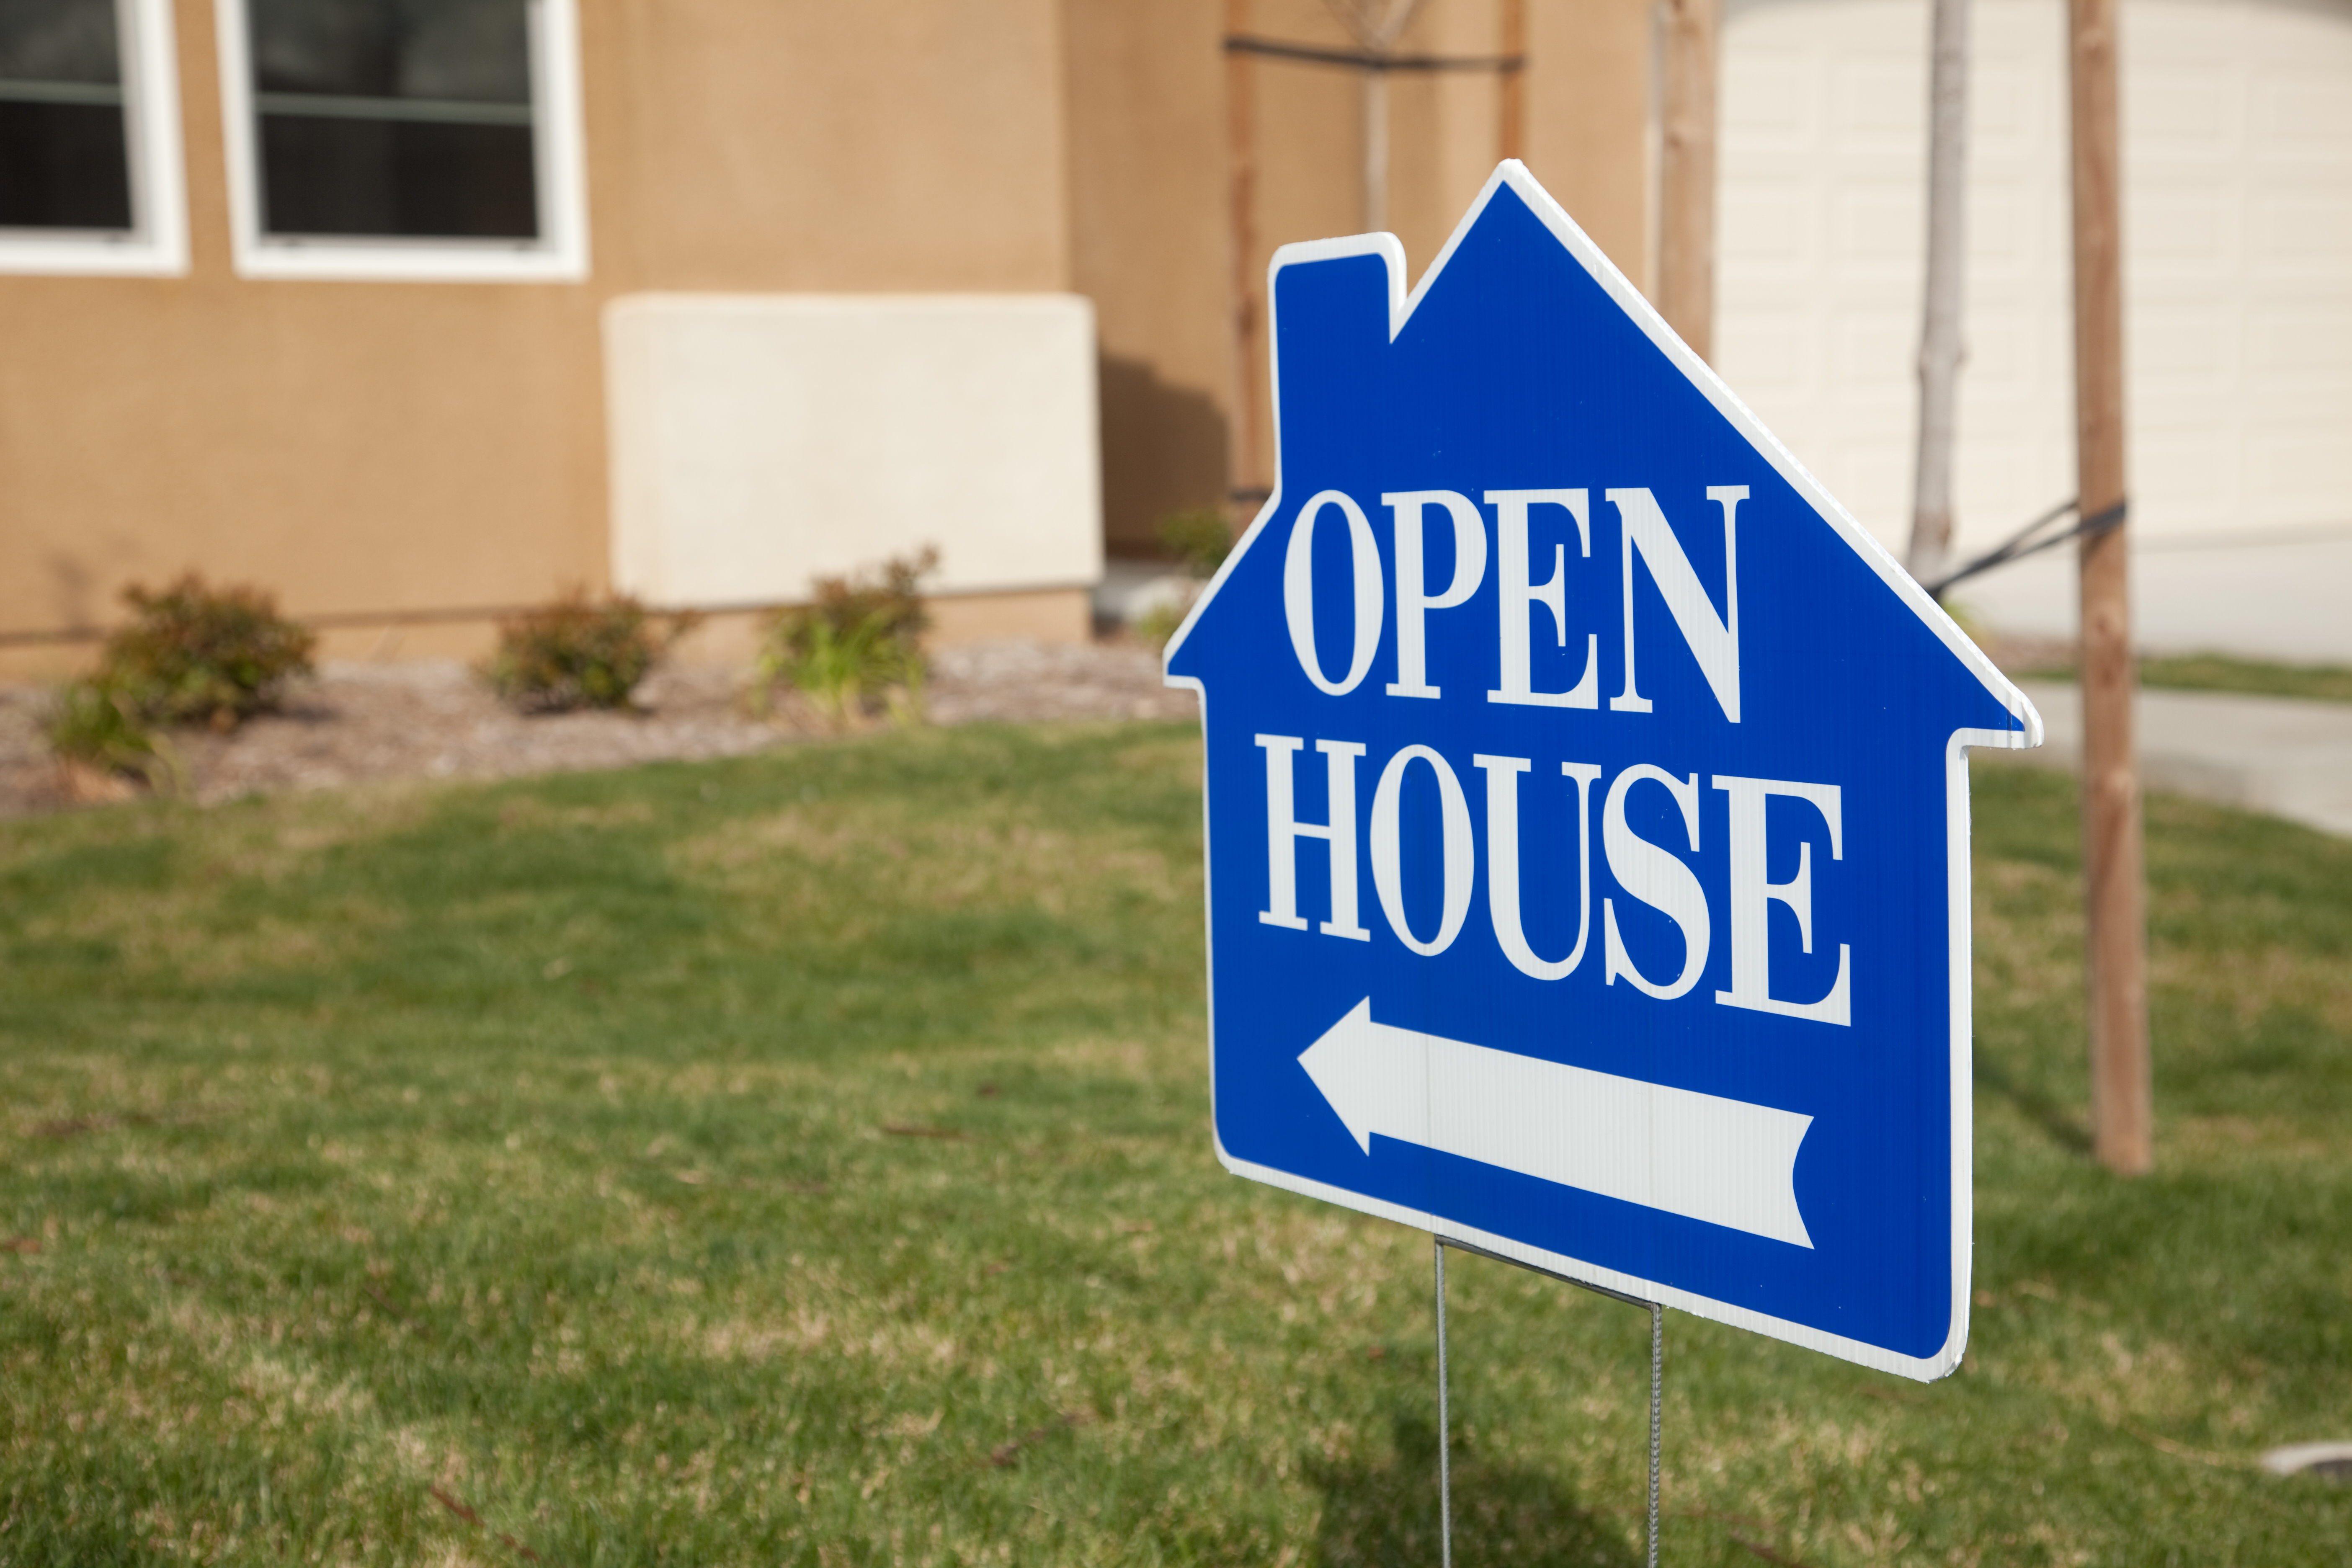 Open House for a Property Sign 